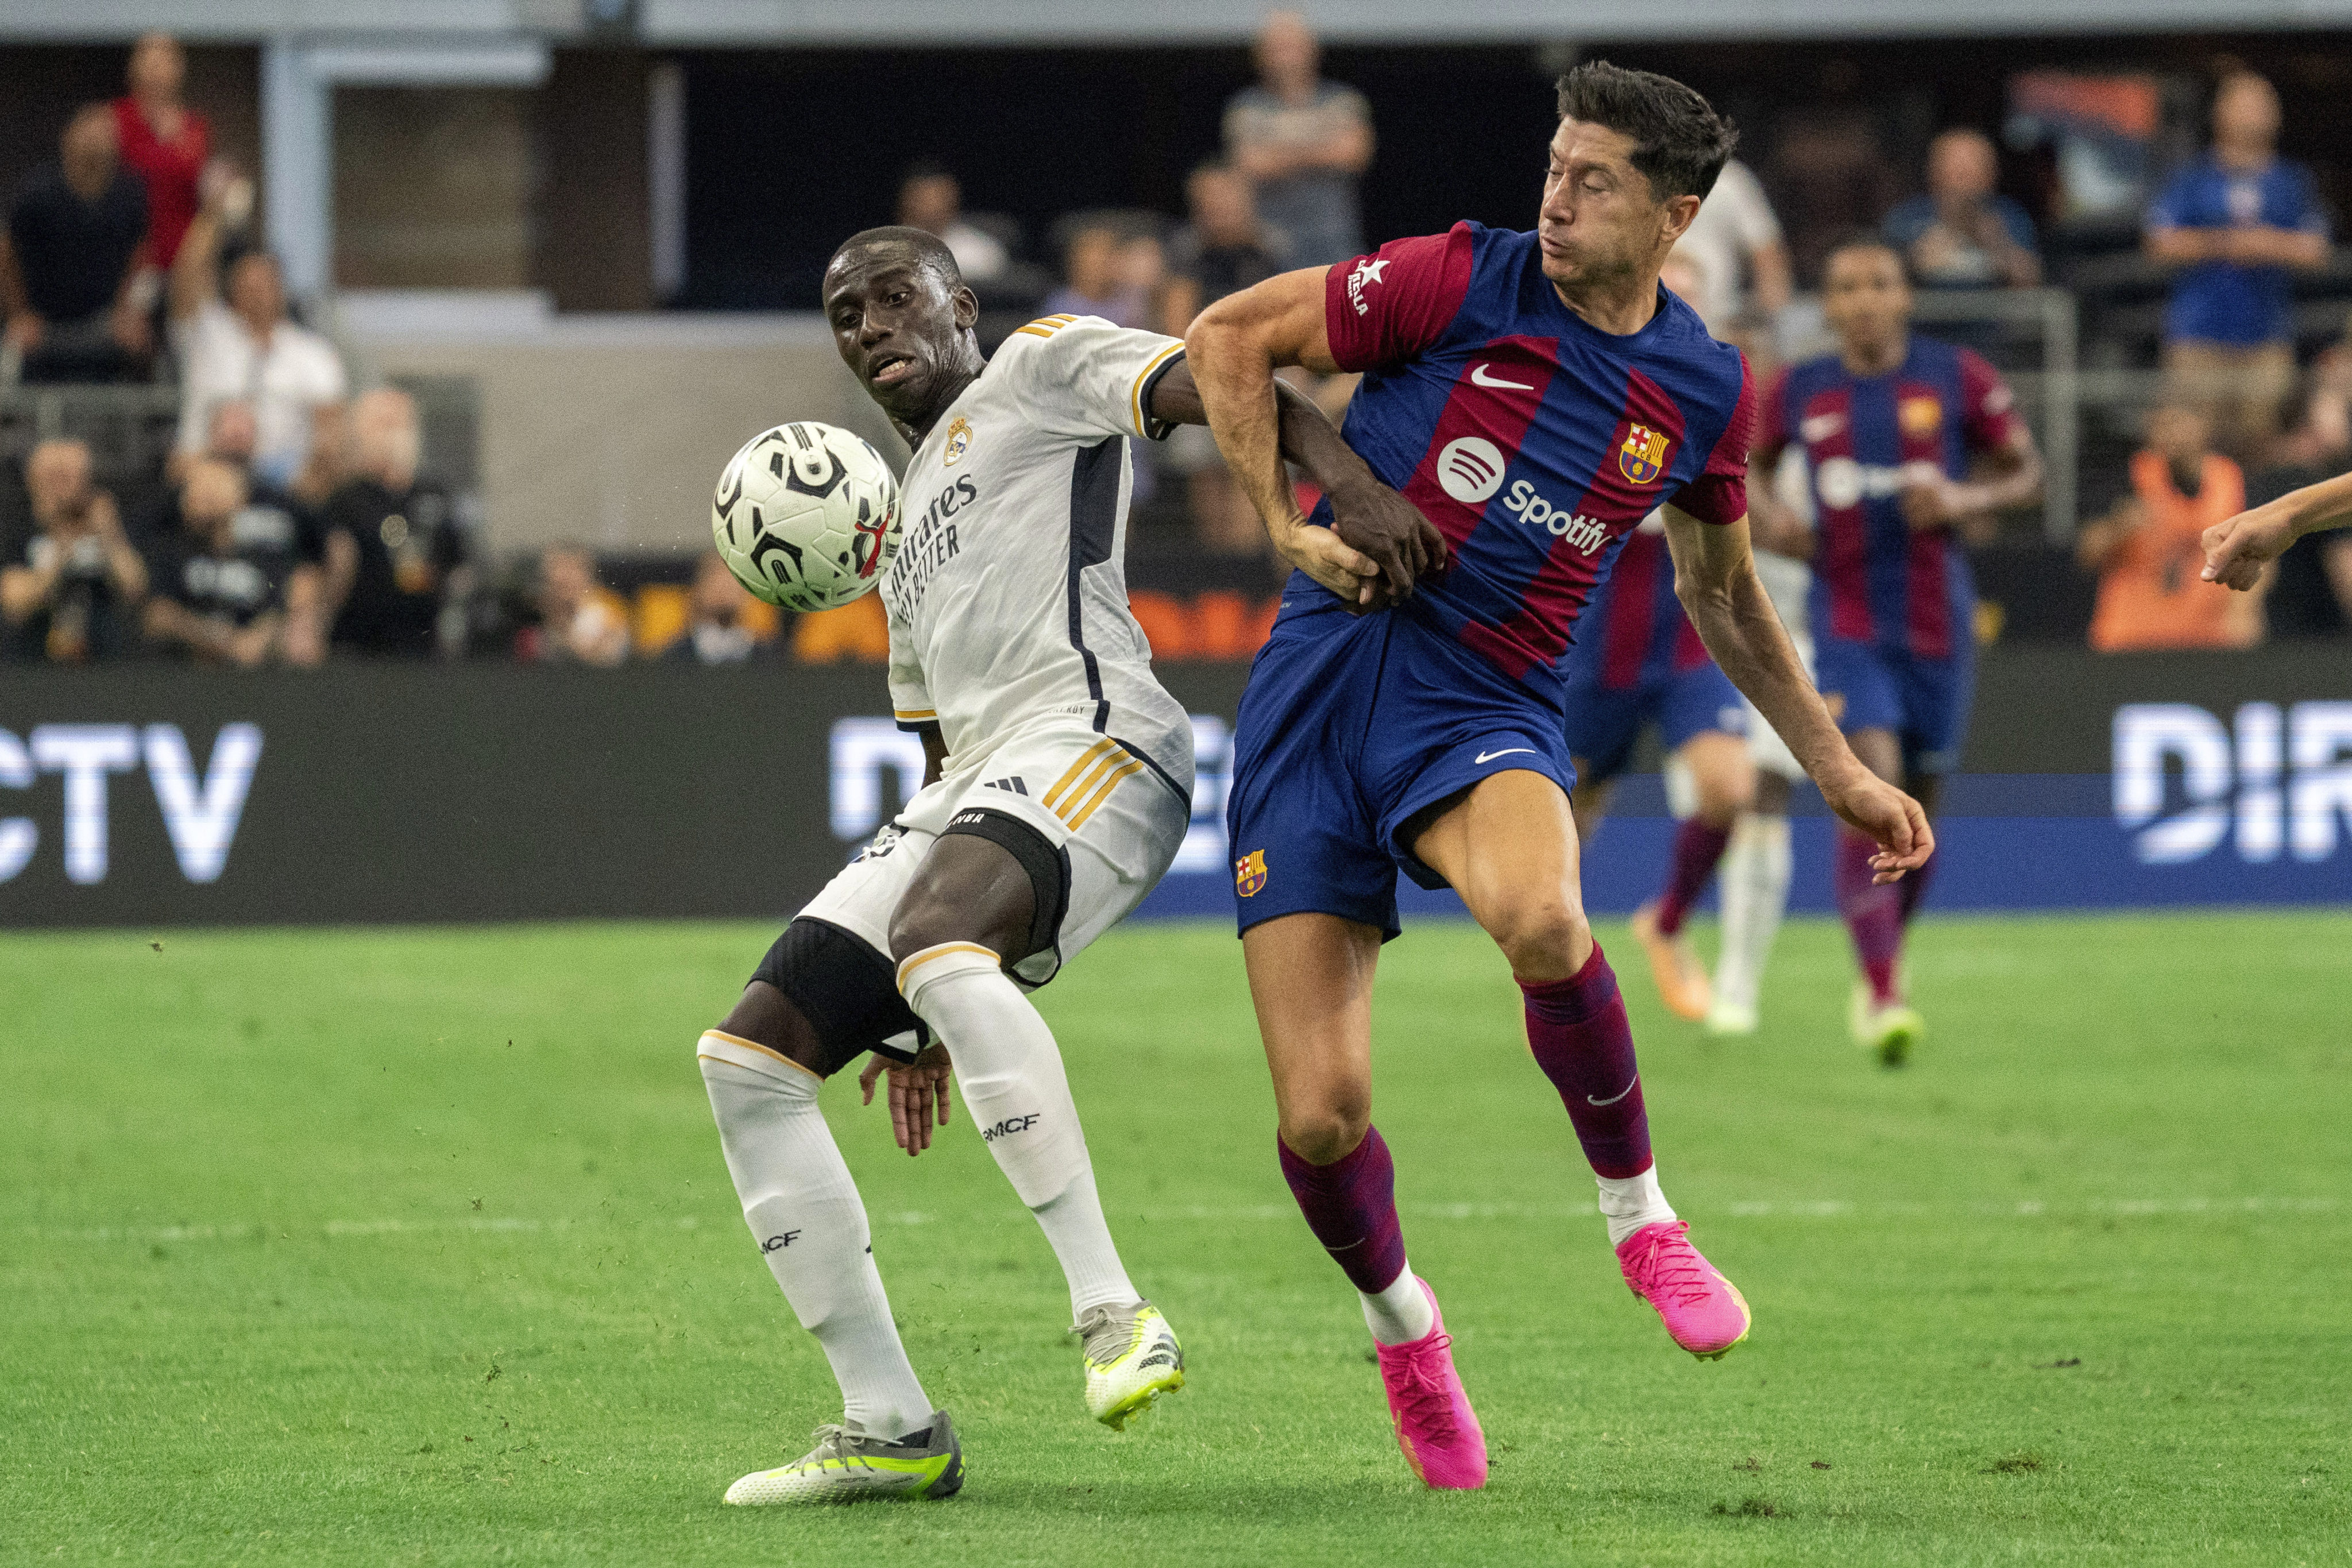 A Spanish league match such as that between Real Madrid and Barcelona could soon be held overseas, and not just as preseason friendlies such as this one in Arlington, Texas last year. Photo: AP